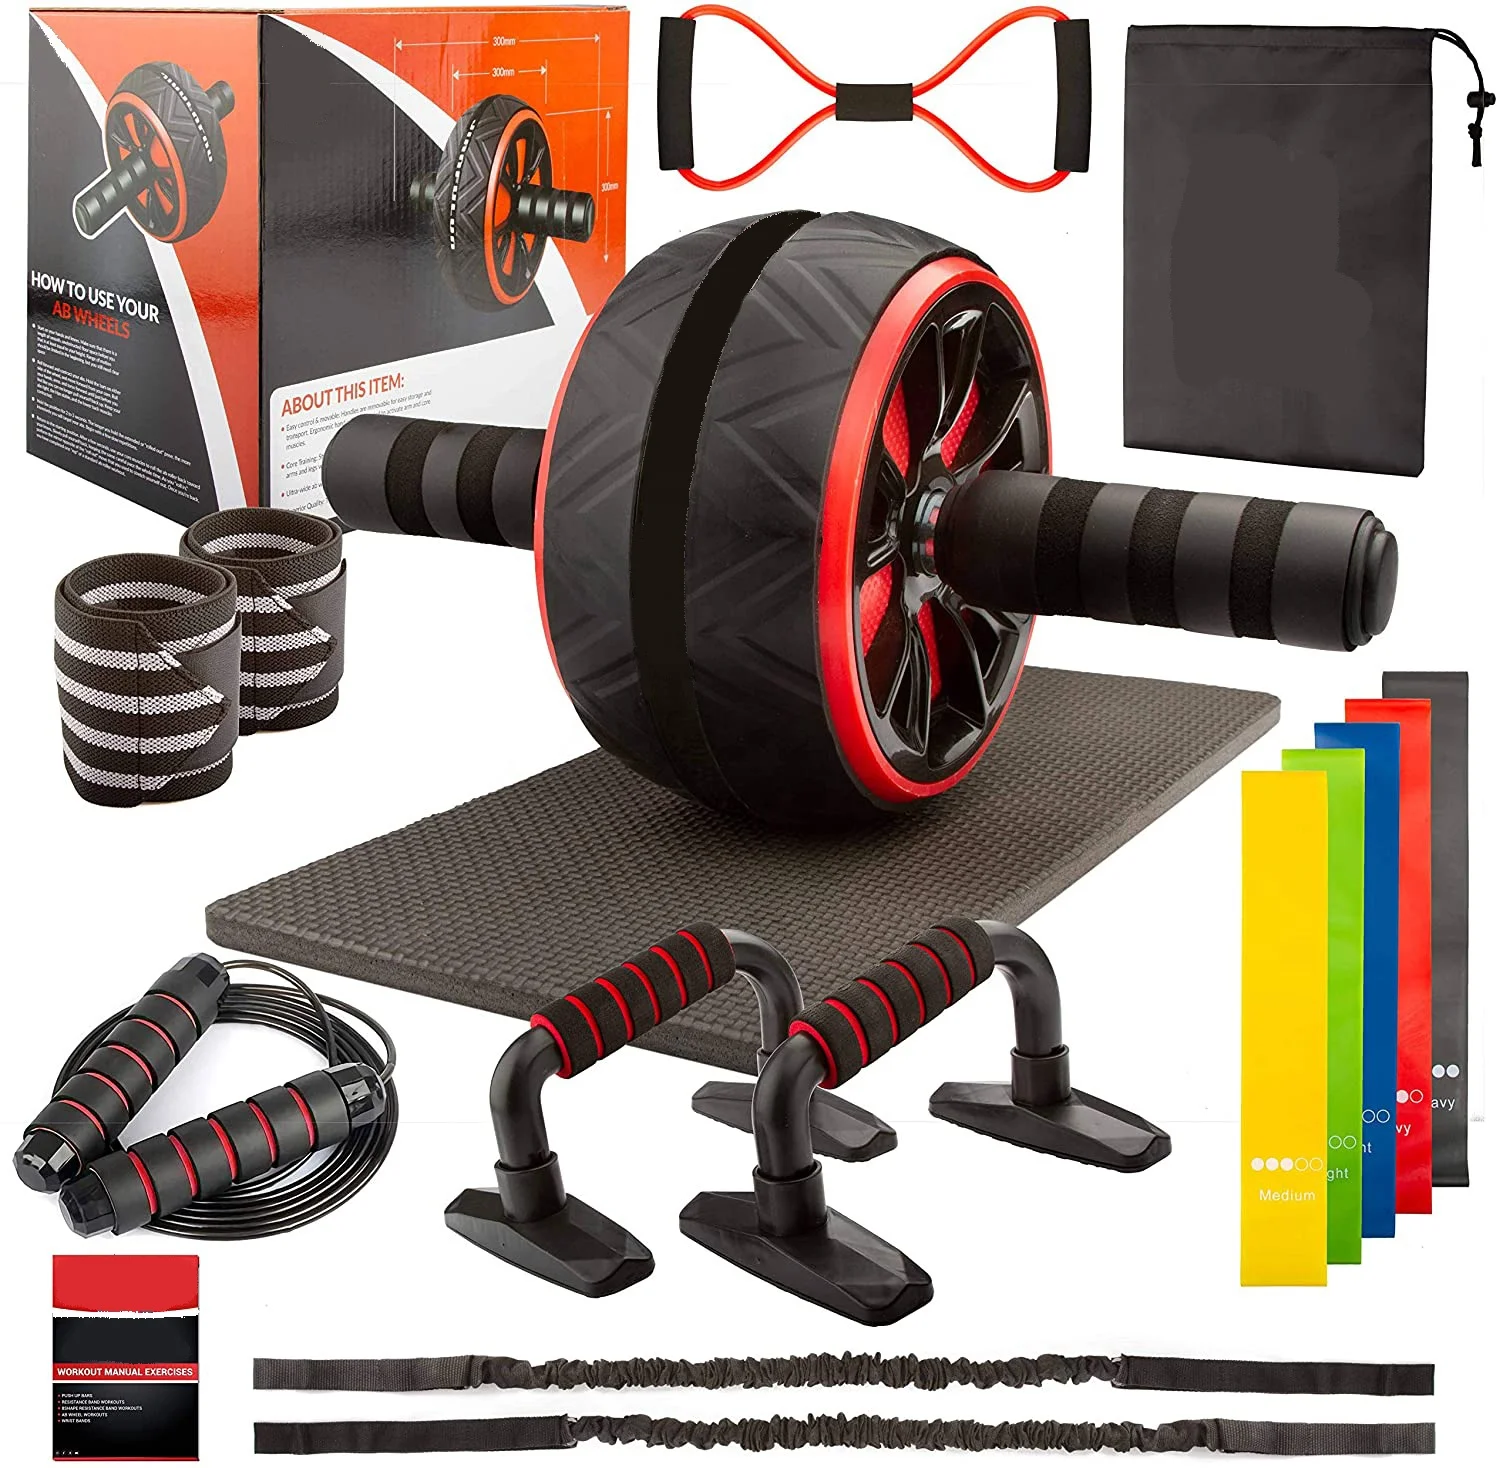 

17-in-1 Home Gym Set Workout Fitness Equipment Abdominal Exercise Muscle Training Abs Ab Wheel Roller With Mat